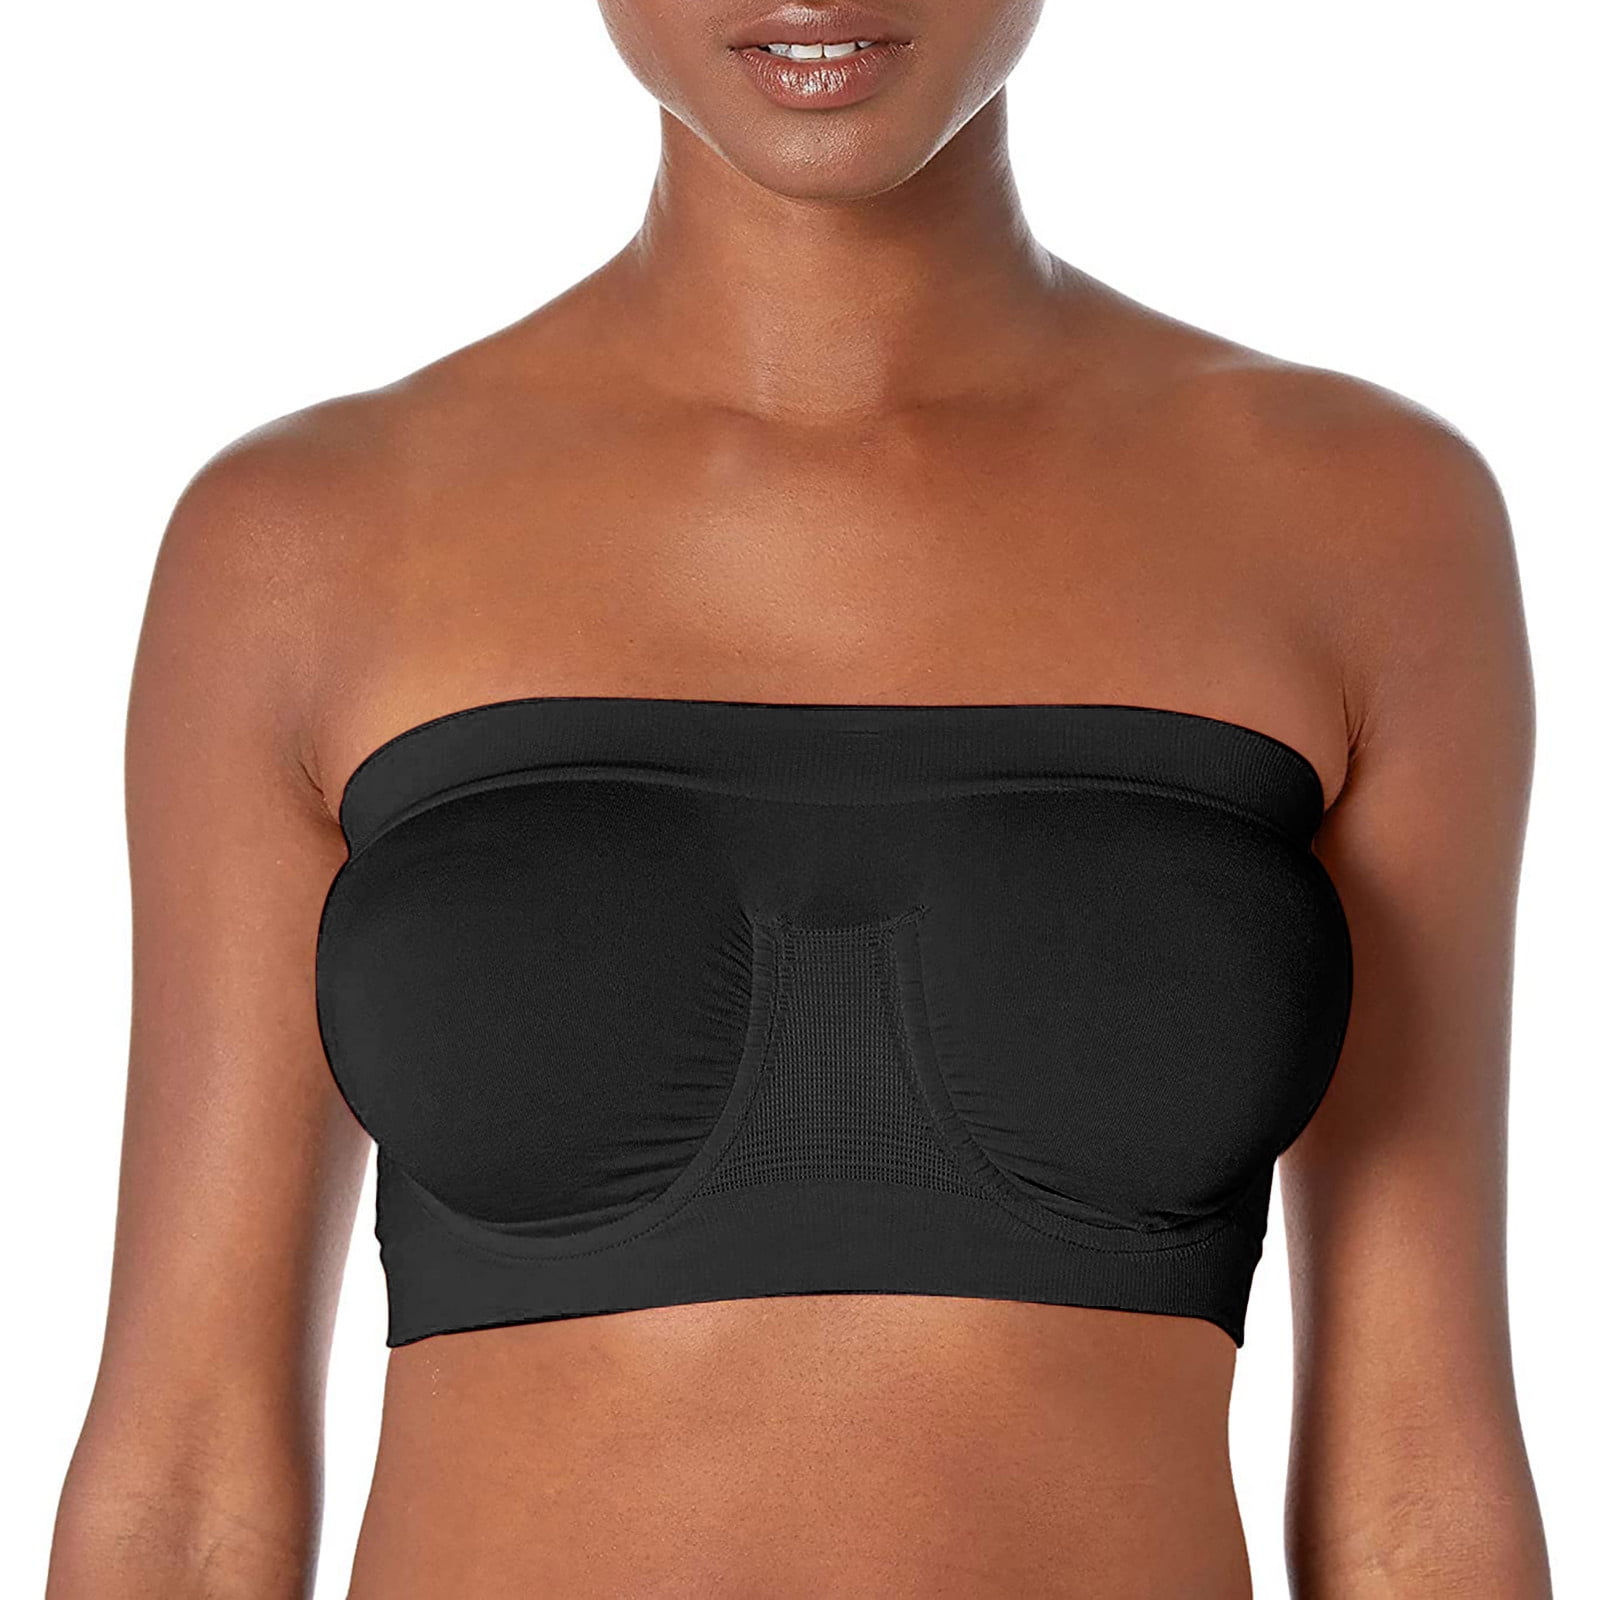 TheLovely Women's Casual Strapless Bandeau Cotton Tube Top w/Built